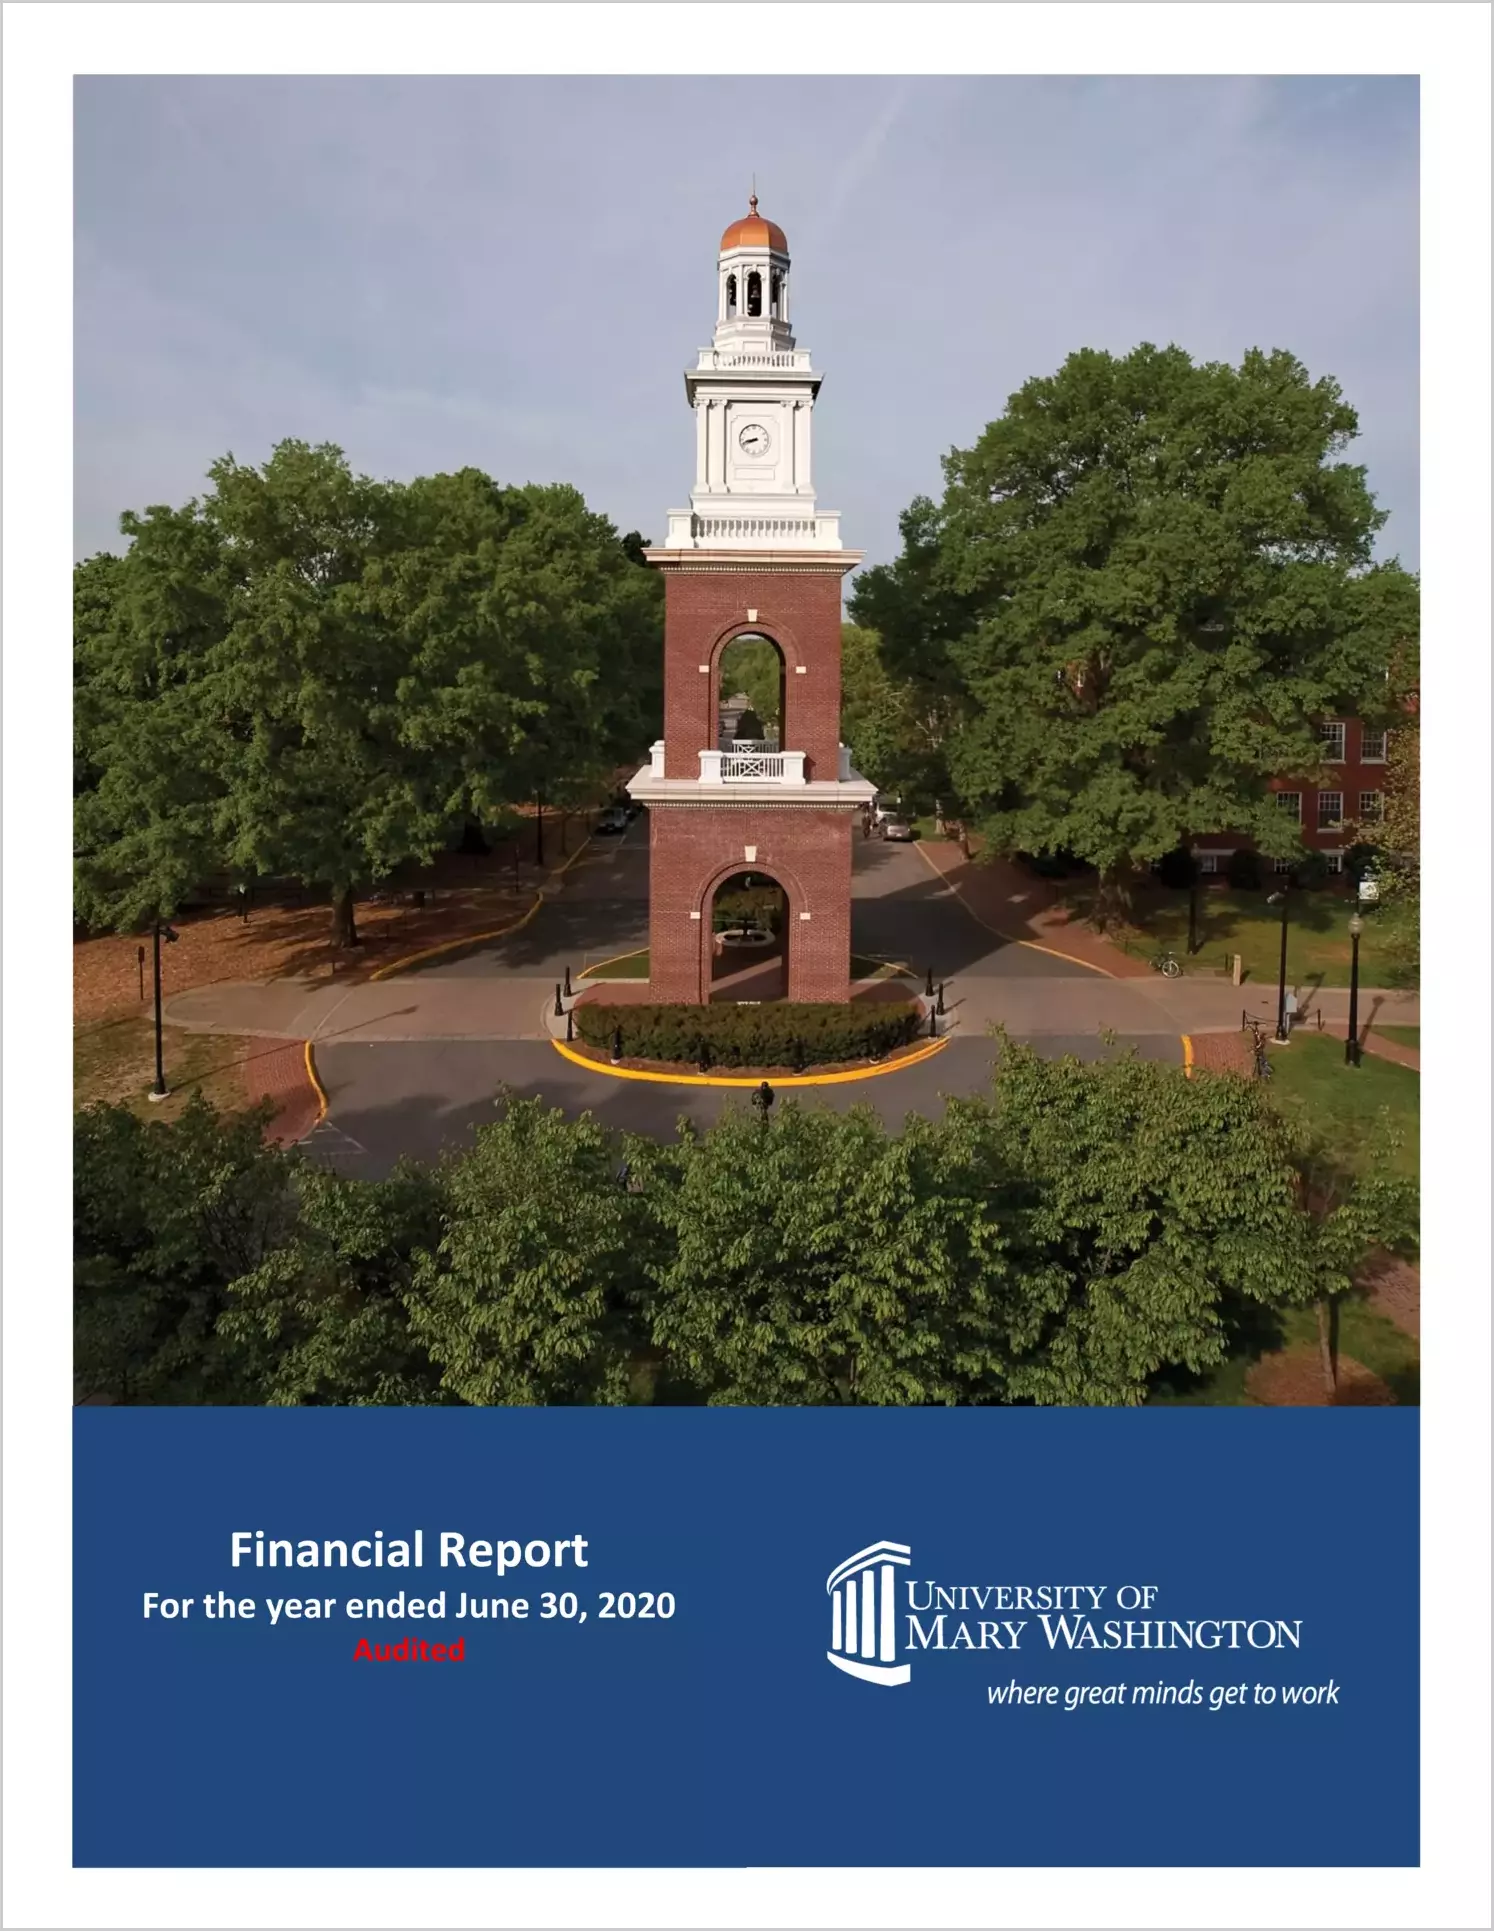 University of Mary Washington Financial Statements for the year ended June 30, 2020